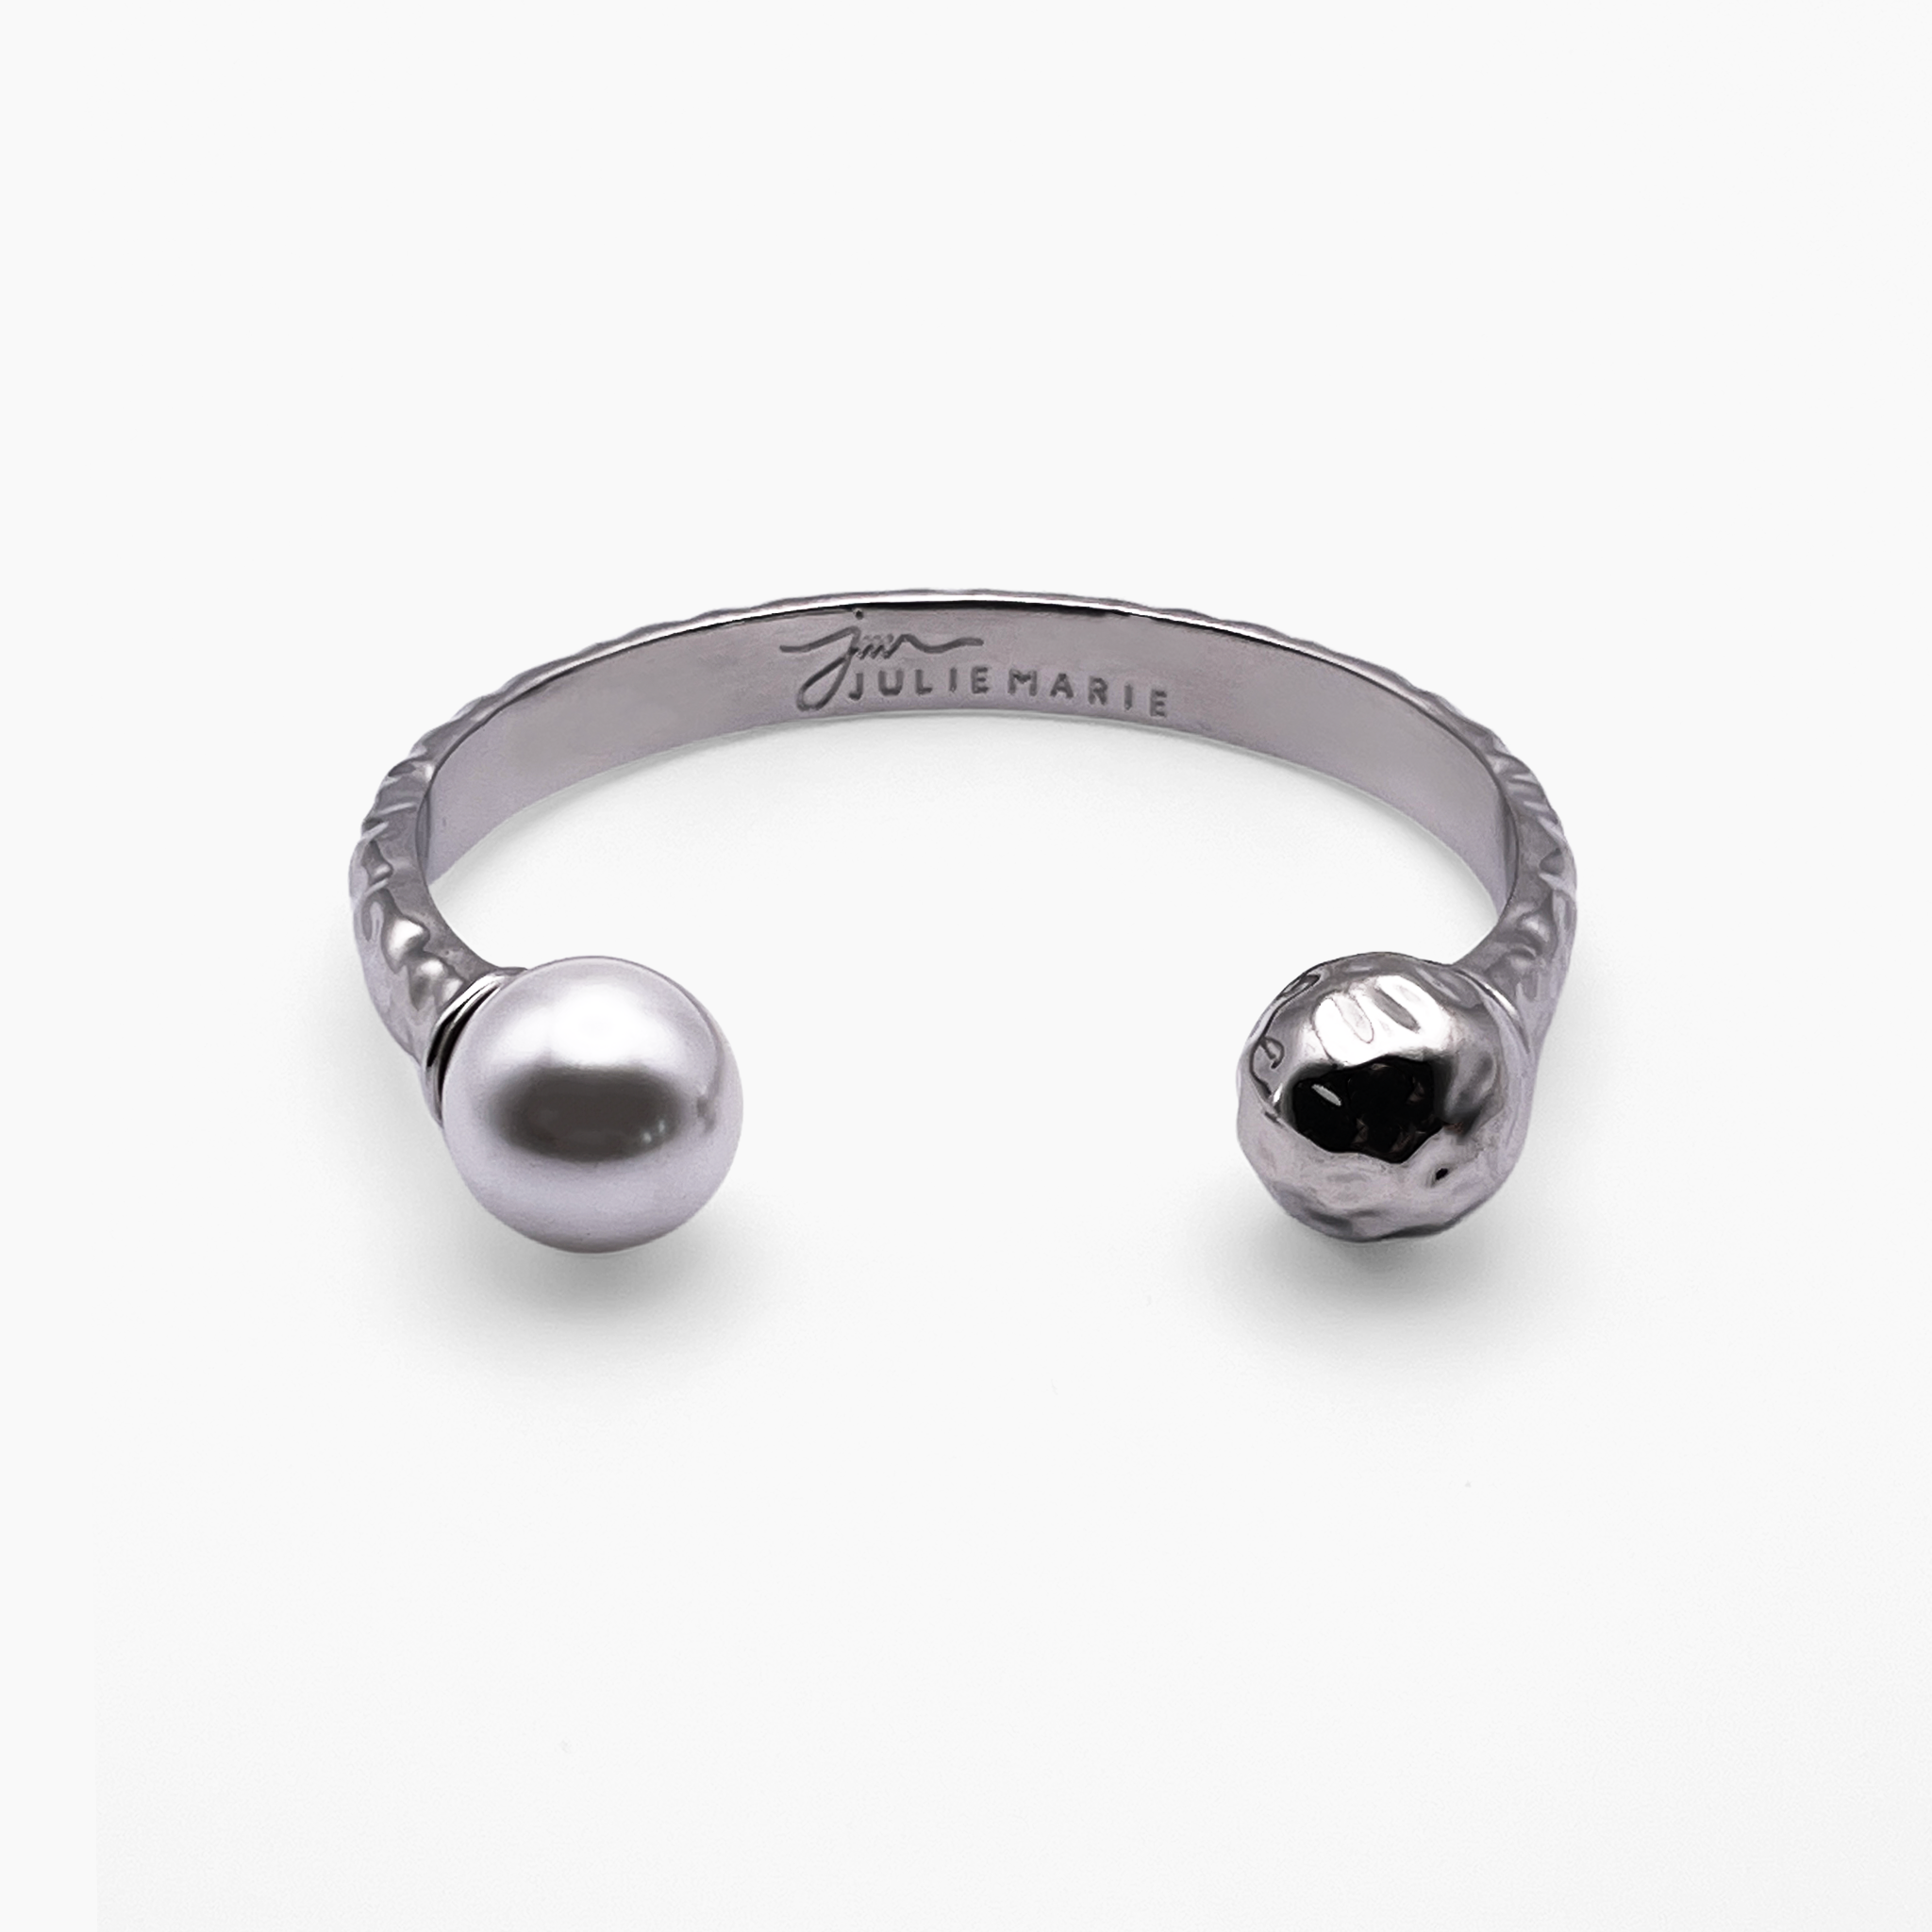 Resilience Variant Silver Bangle Cuff